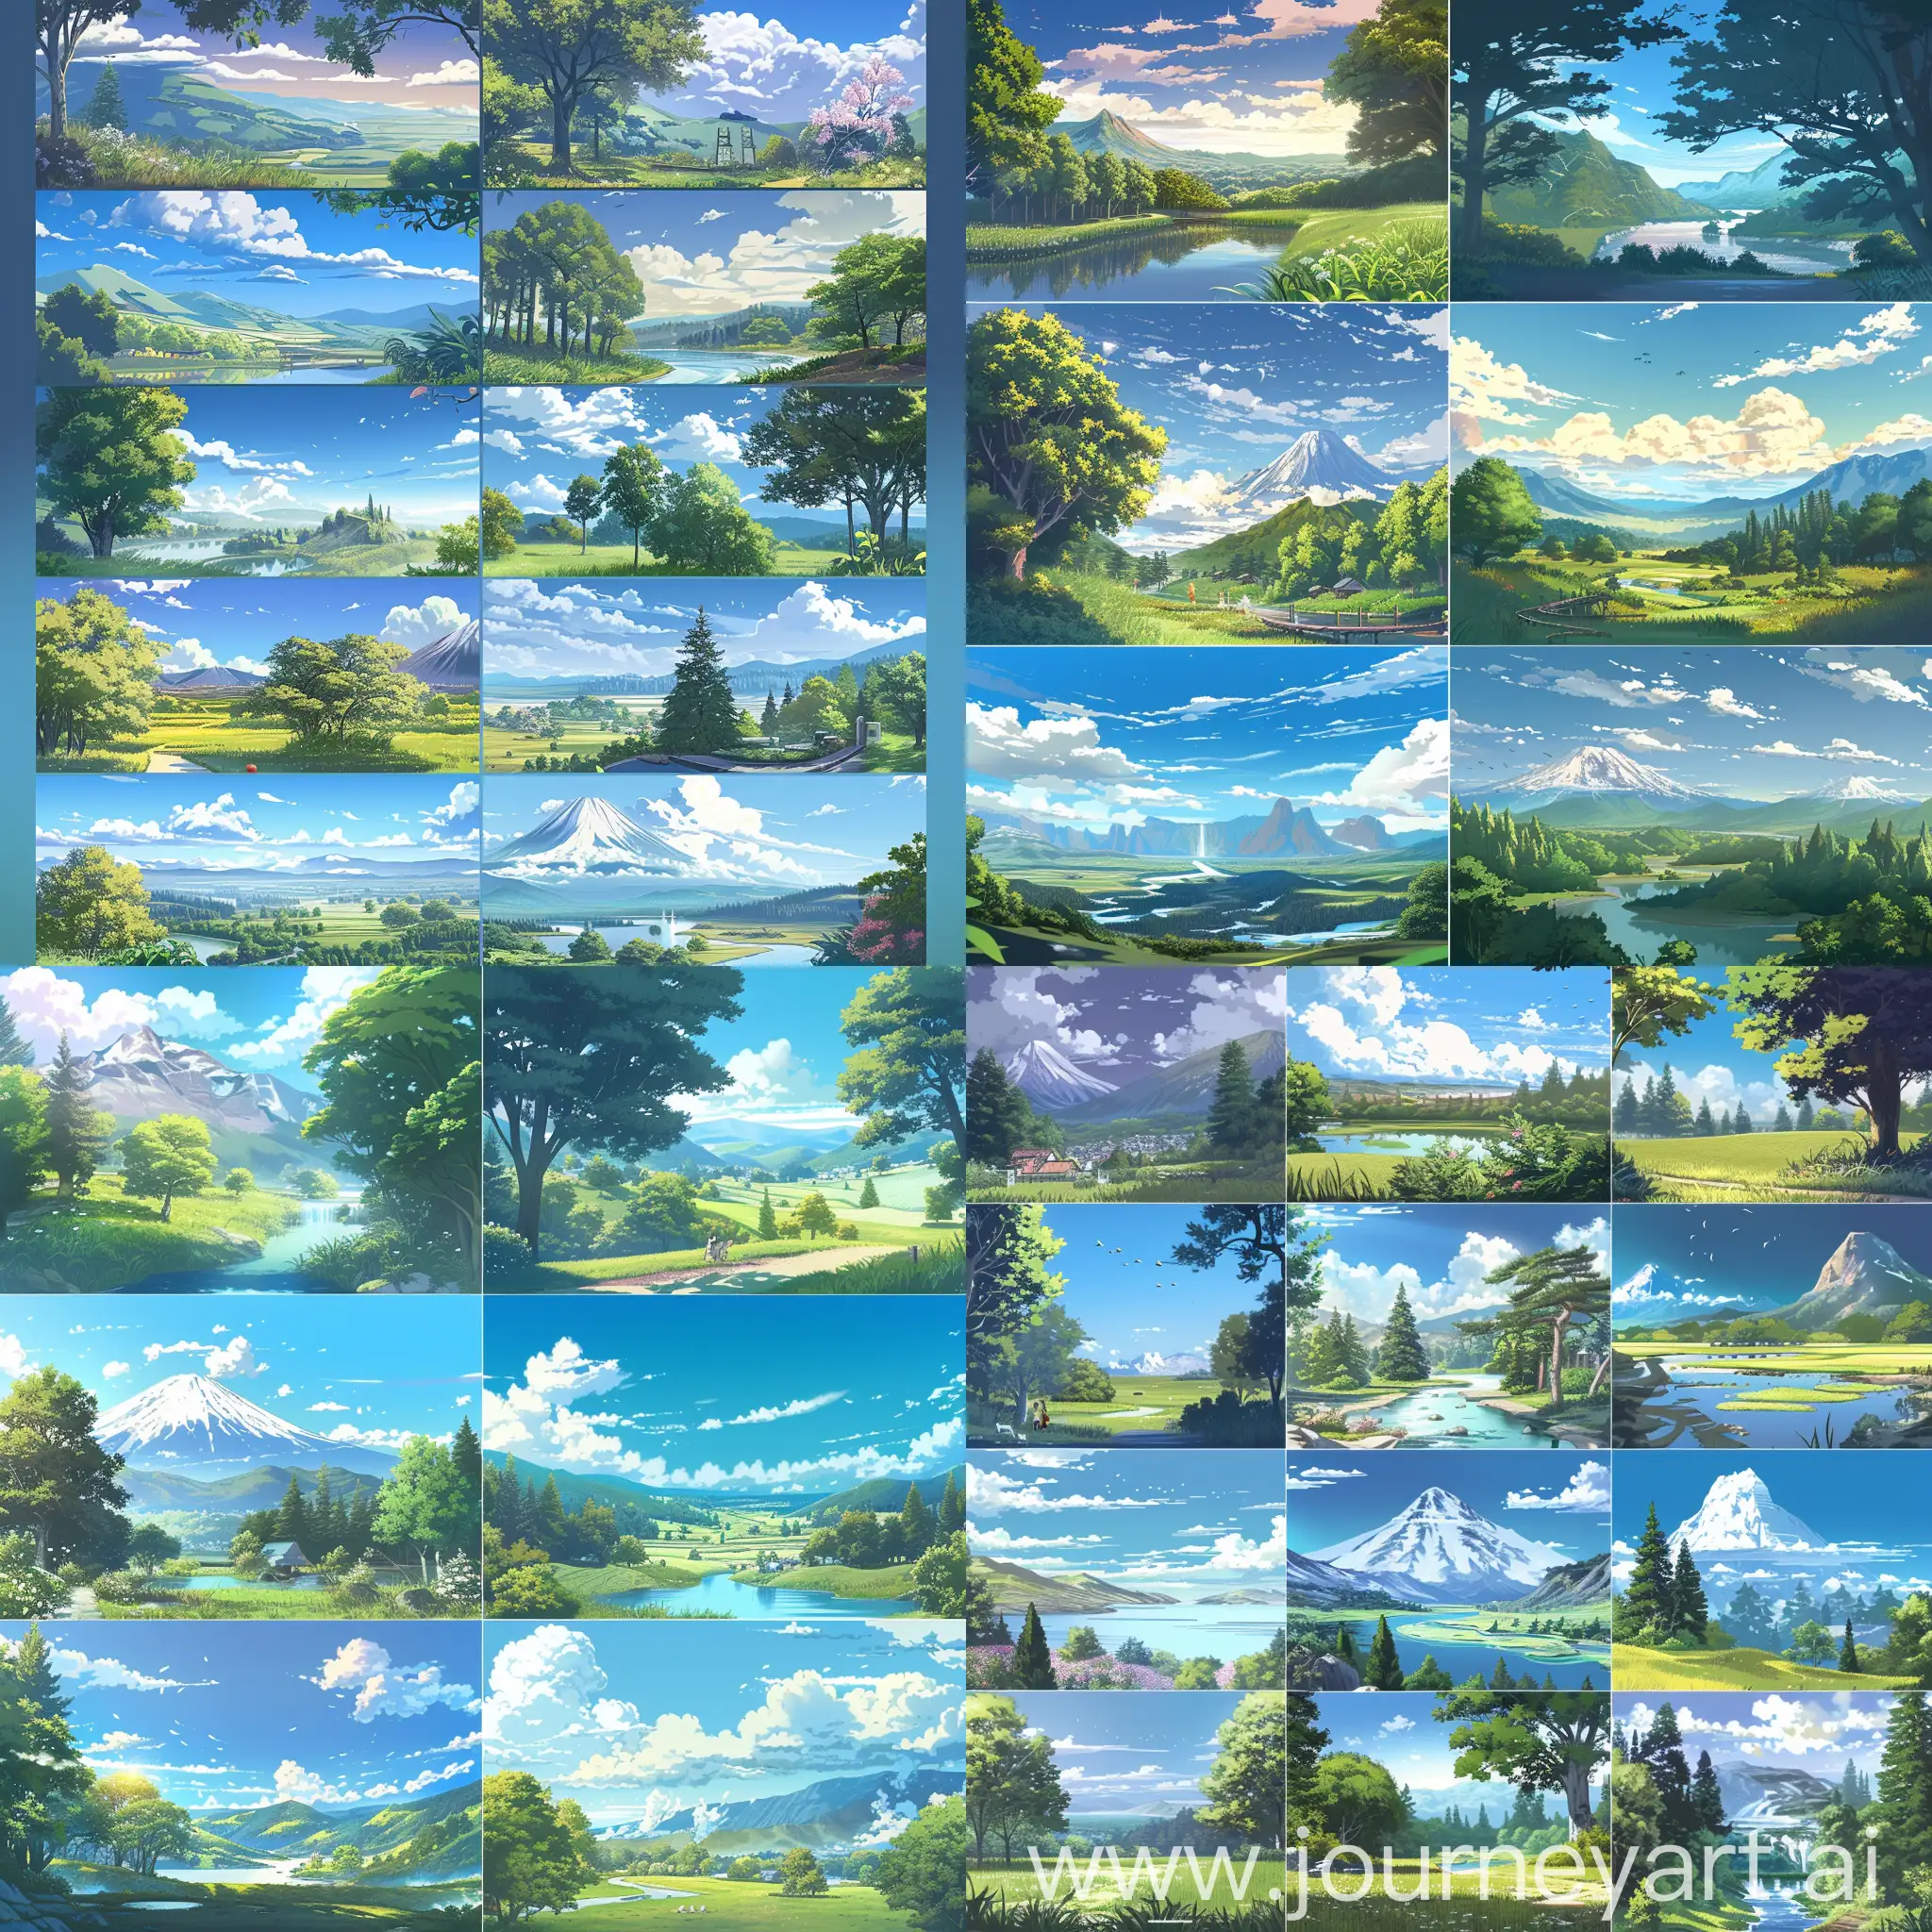 Subject: The primary subject of the image is tranquil anime scenery, reminiscent of Makoto Shinkai's distinctive style. Setting: The setting is characterized by various serene nature landscapes, depicting different locations with calm and quiet views. It emphasizes the beauty of summer with clear skies and peaceful surroundings. Background/Style/Coloring: The background features beautiful and detailed illustrations of nature, with an emphasis on ultra HD quality, sharp details, and vibrant coloring reminiscent of anime aesthetics. The style mirrors Makoto Shinkai's renowned approach, known for its captivating portrayal of landscapes and skies. Action/Items: There is no specific action depicted in the image; instead, it focuses on showcasing the beauty of nature. The key items include various elements of nature such as trees, mountains, rivers, and skies, all rendered in high-quality illustration. Costume/Appearance/Accessories: As it's a landscape image, there are no characters or costumes present. However, the appearance highlights the serene and picturesque qualities of nature, with attention to detail and clarity in every aspect.